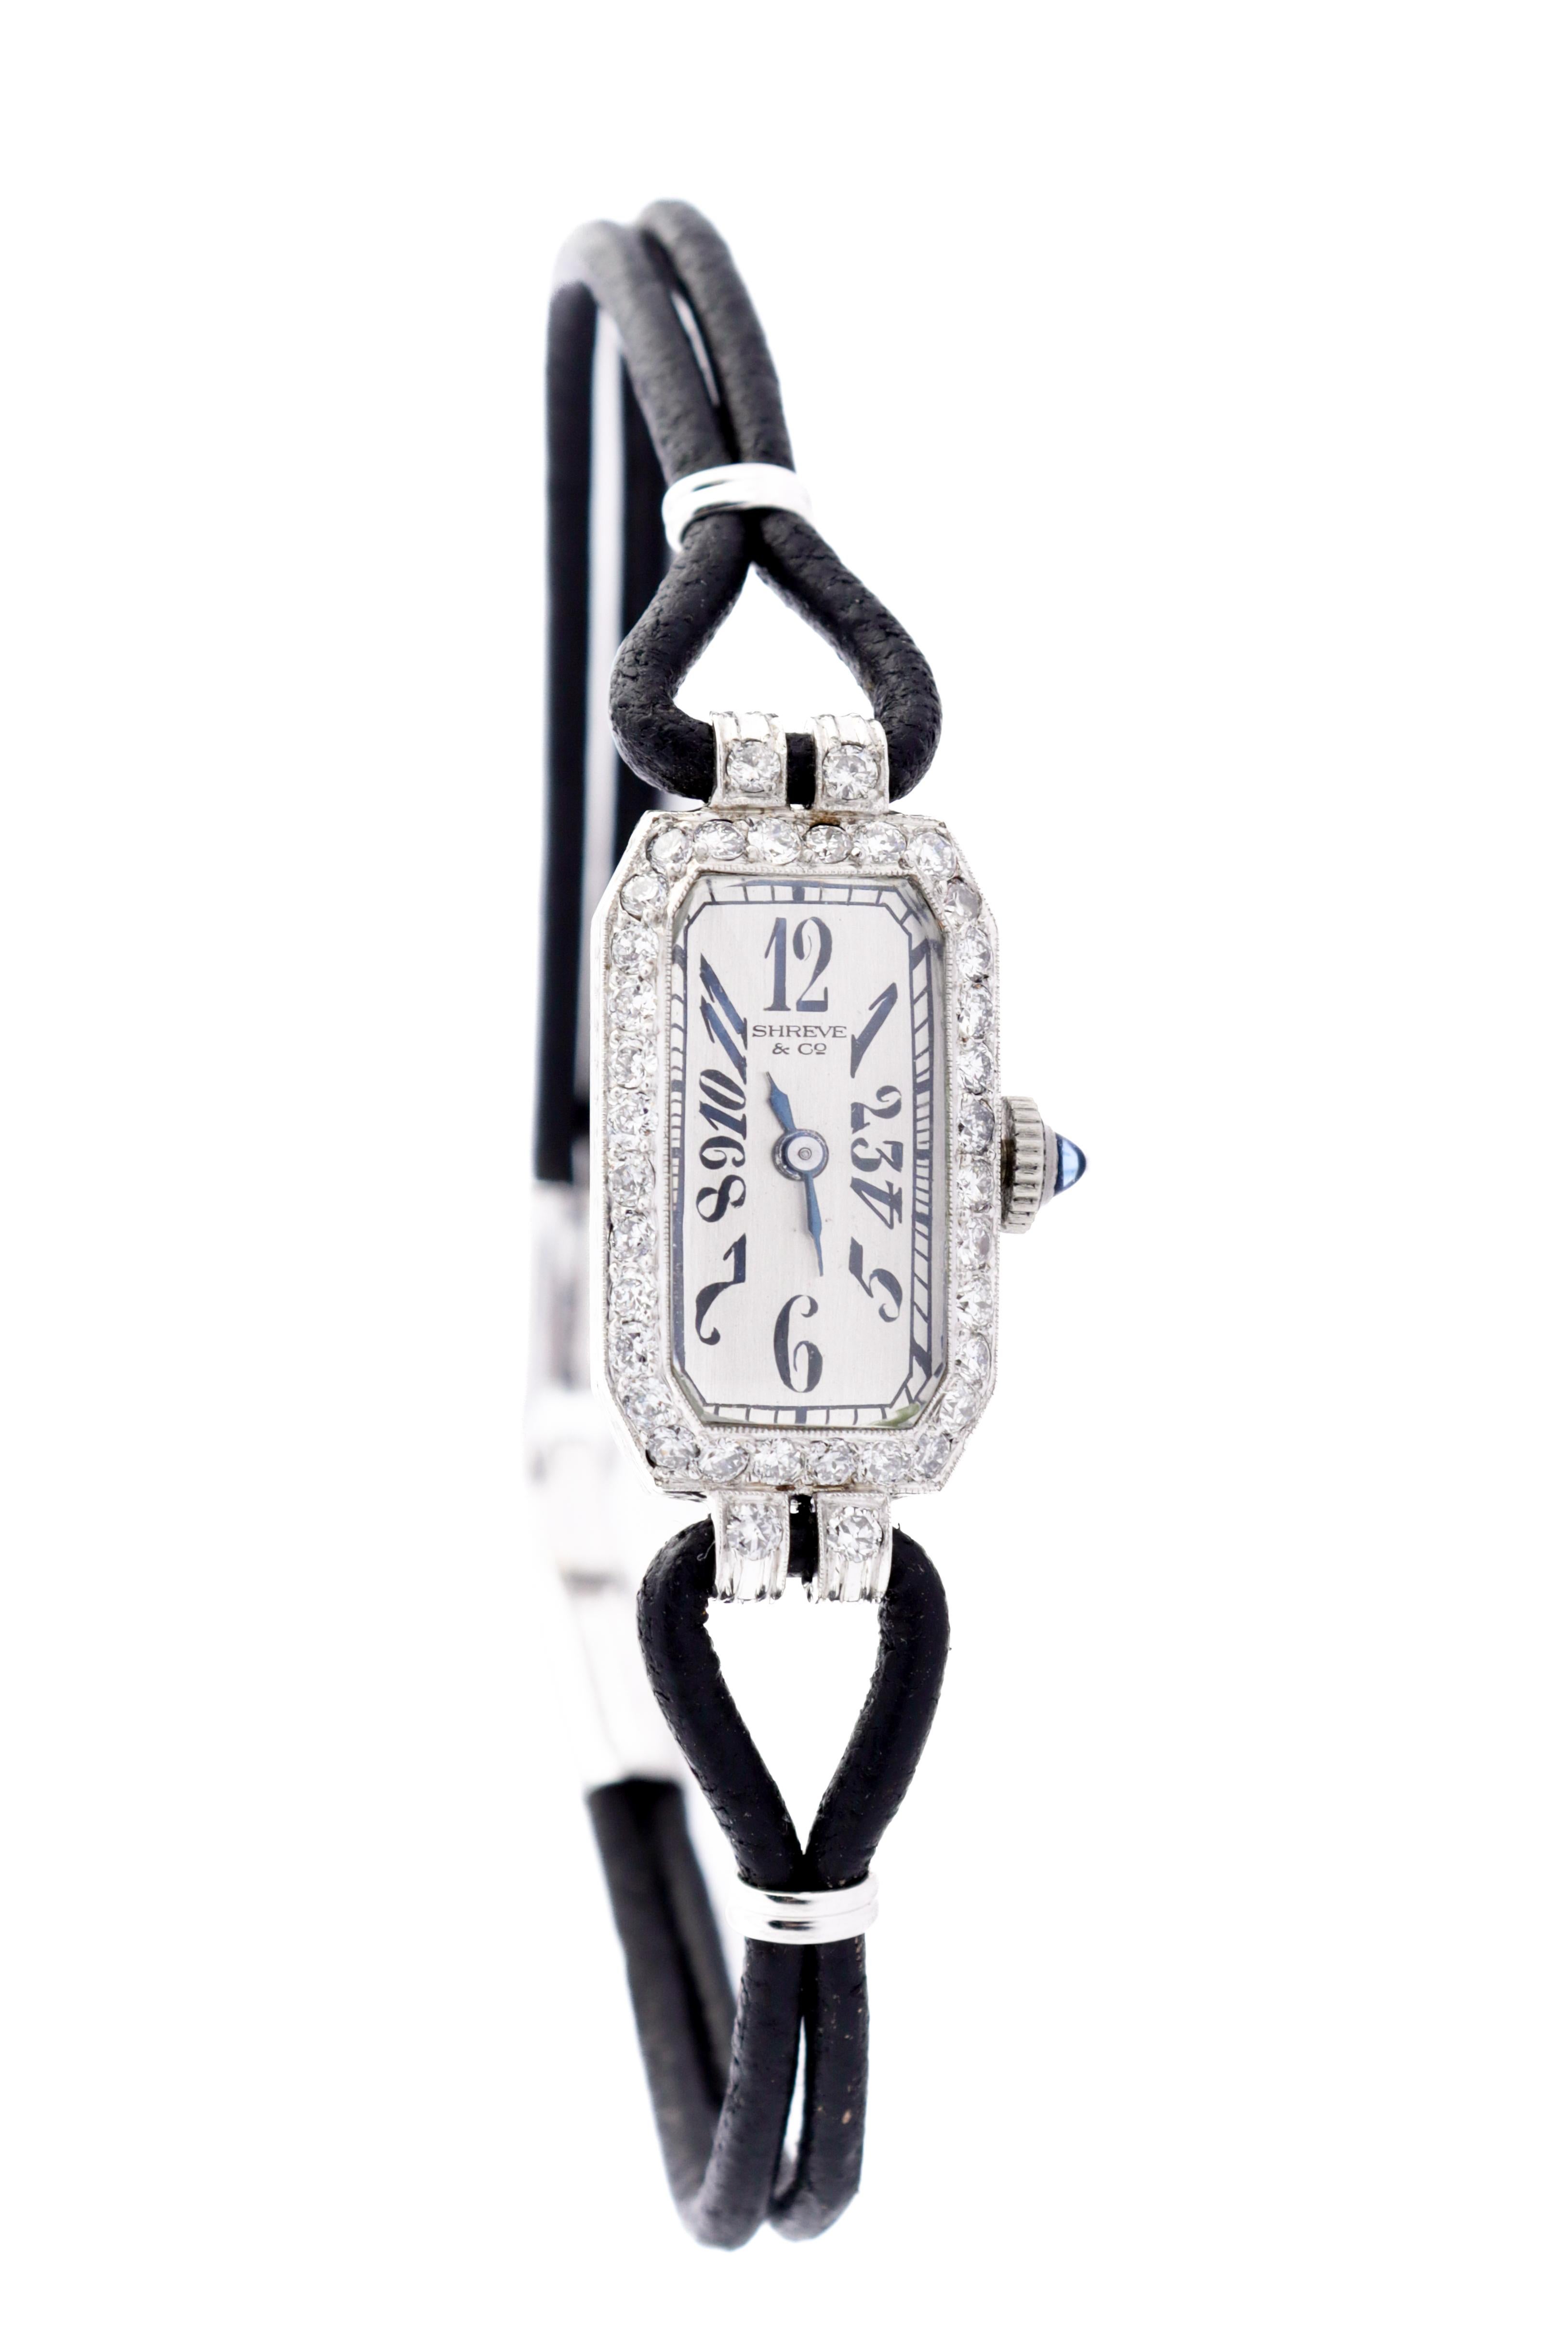 Shreve & Co Platinum Ladies Art Deco Diamond Dress Watch with Leather Cord 1920s For Sale 1